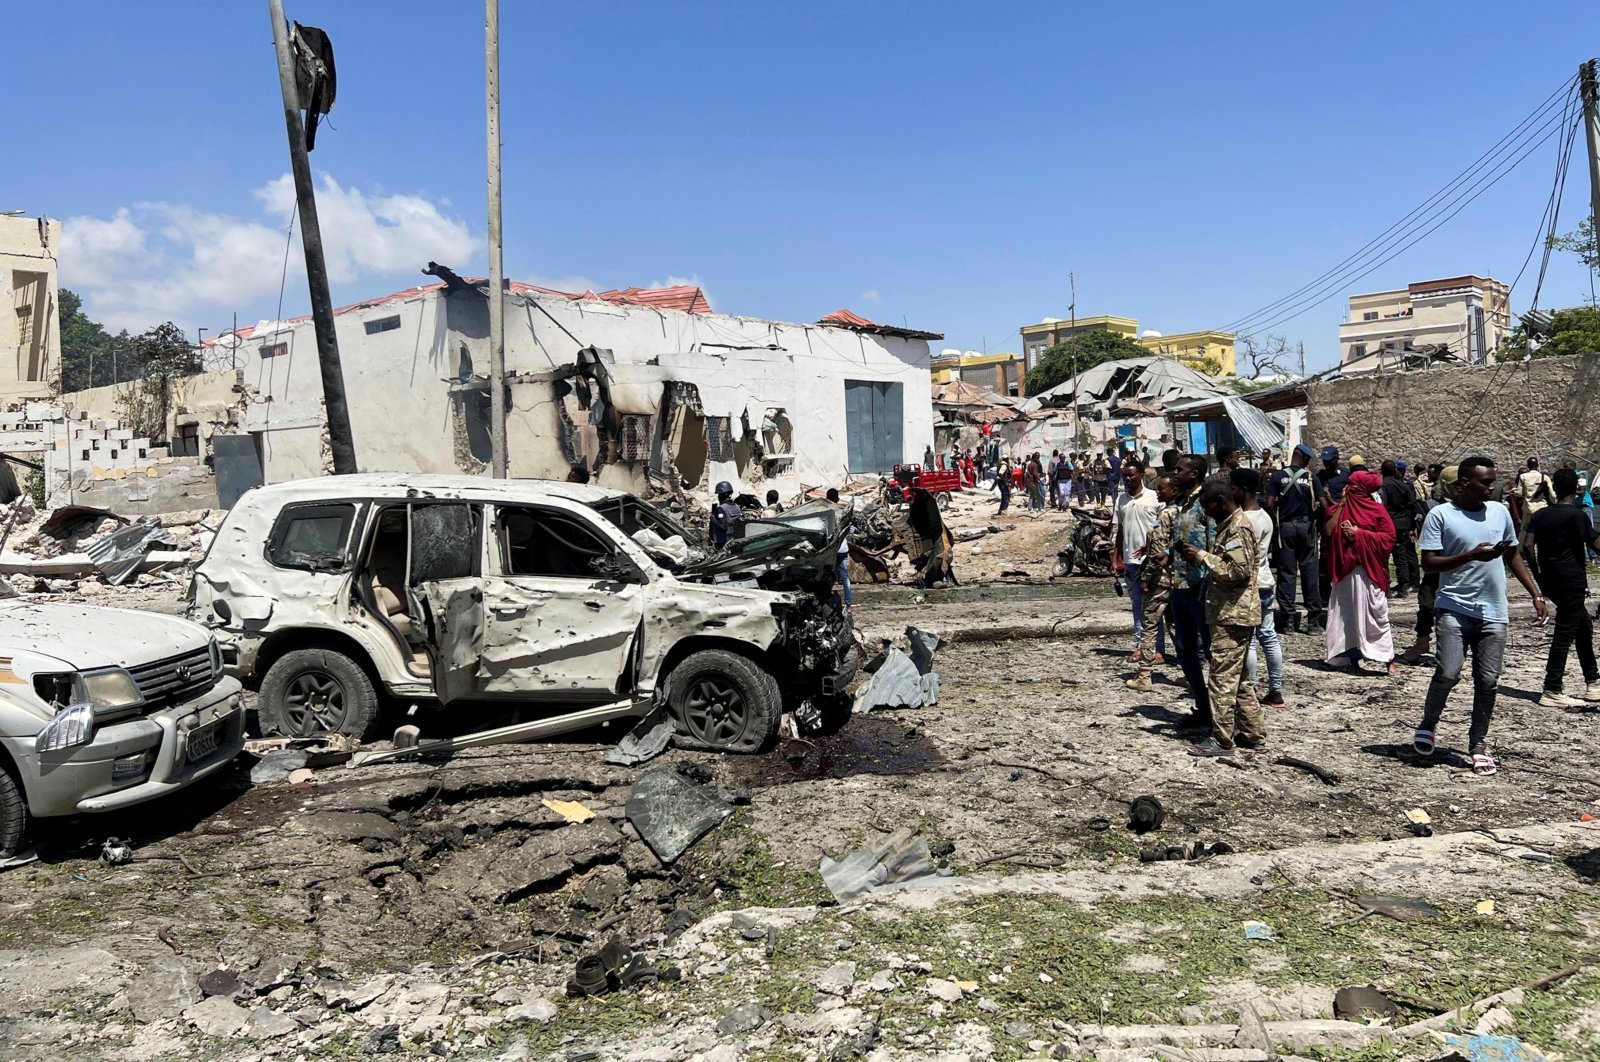 Civilians look at the wrecked vehicles at the scene of an explosion in the Hamarweyne district of Mogadishu, Somalia, Jan. 12, 2022. (Reuters Photo)